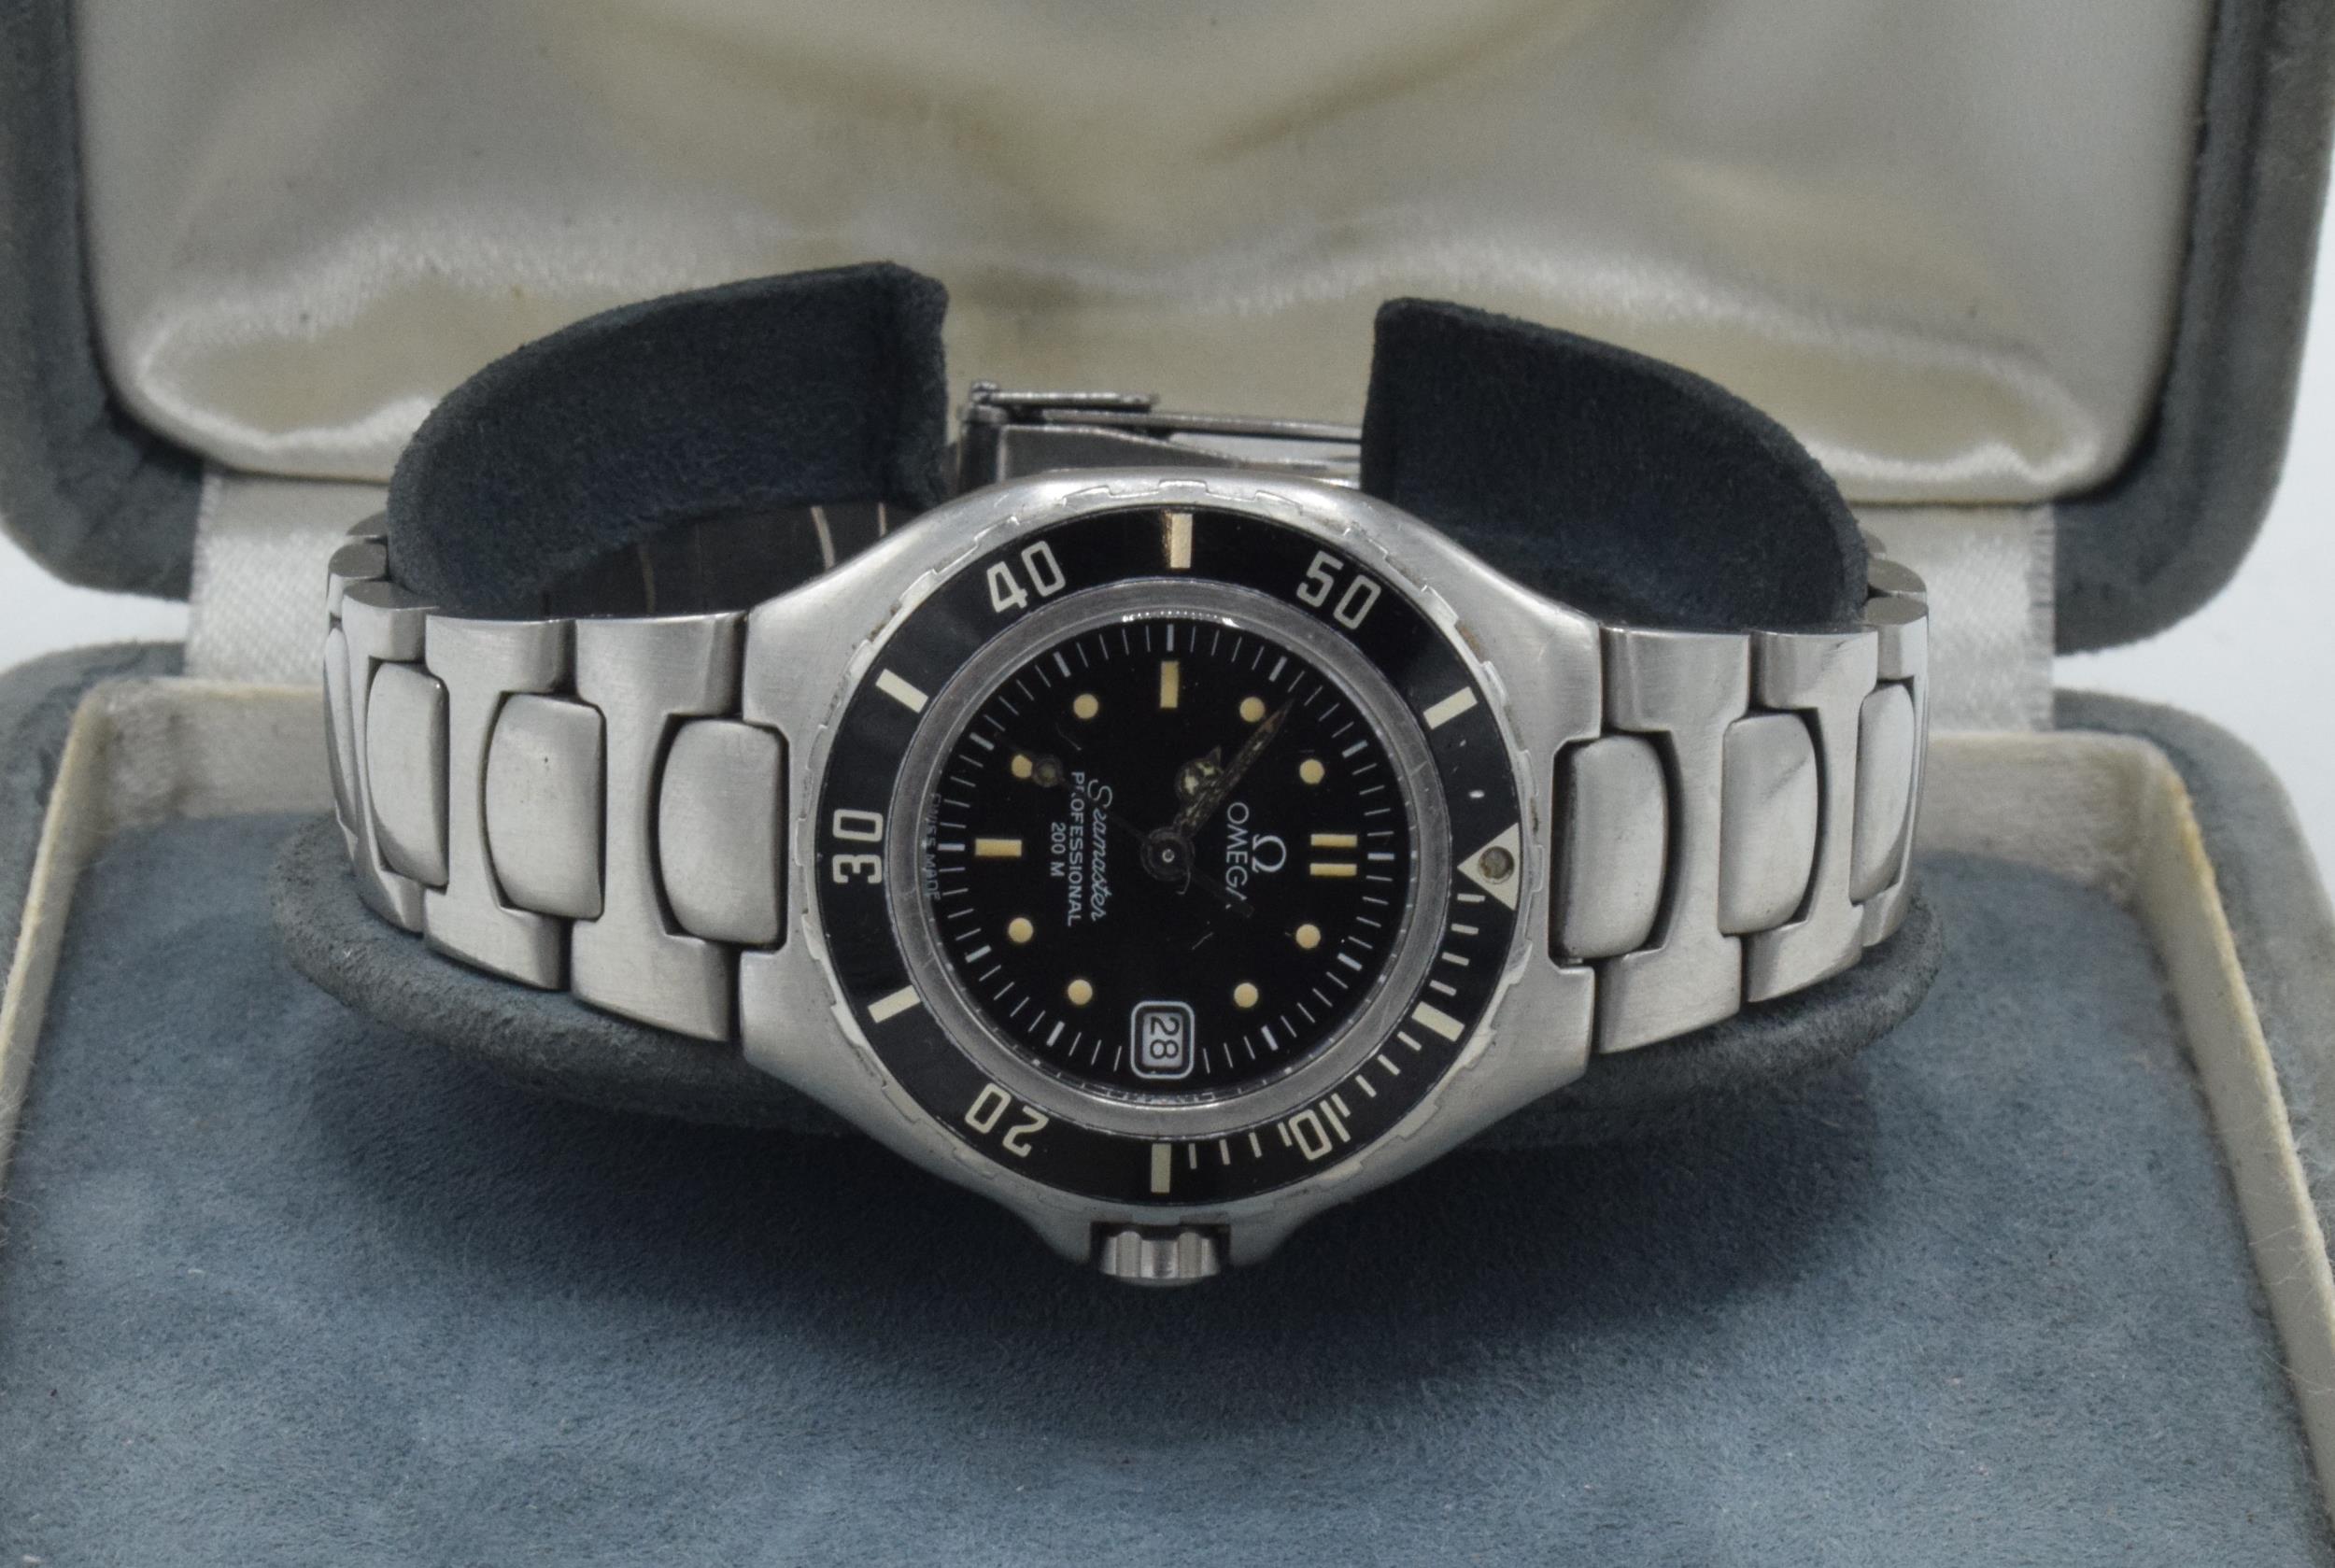 Boxed Omega Seamaster Professional 200 M, stainless steel bracelet, in working / ticking order, 28mm